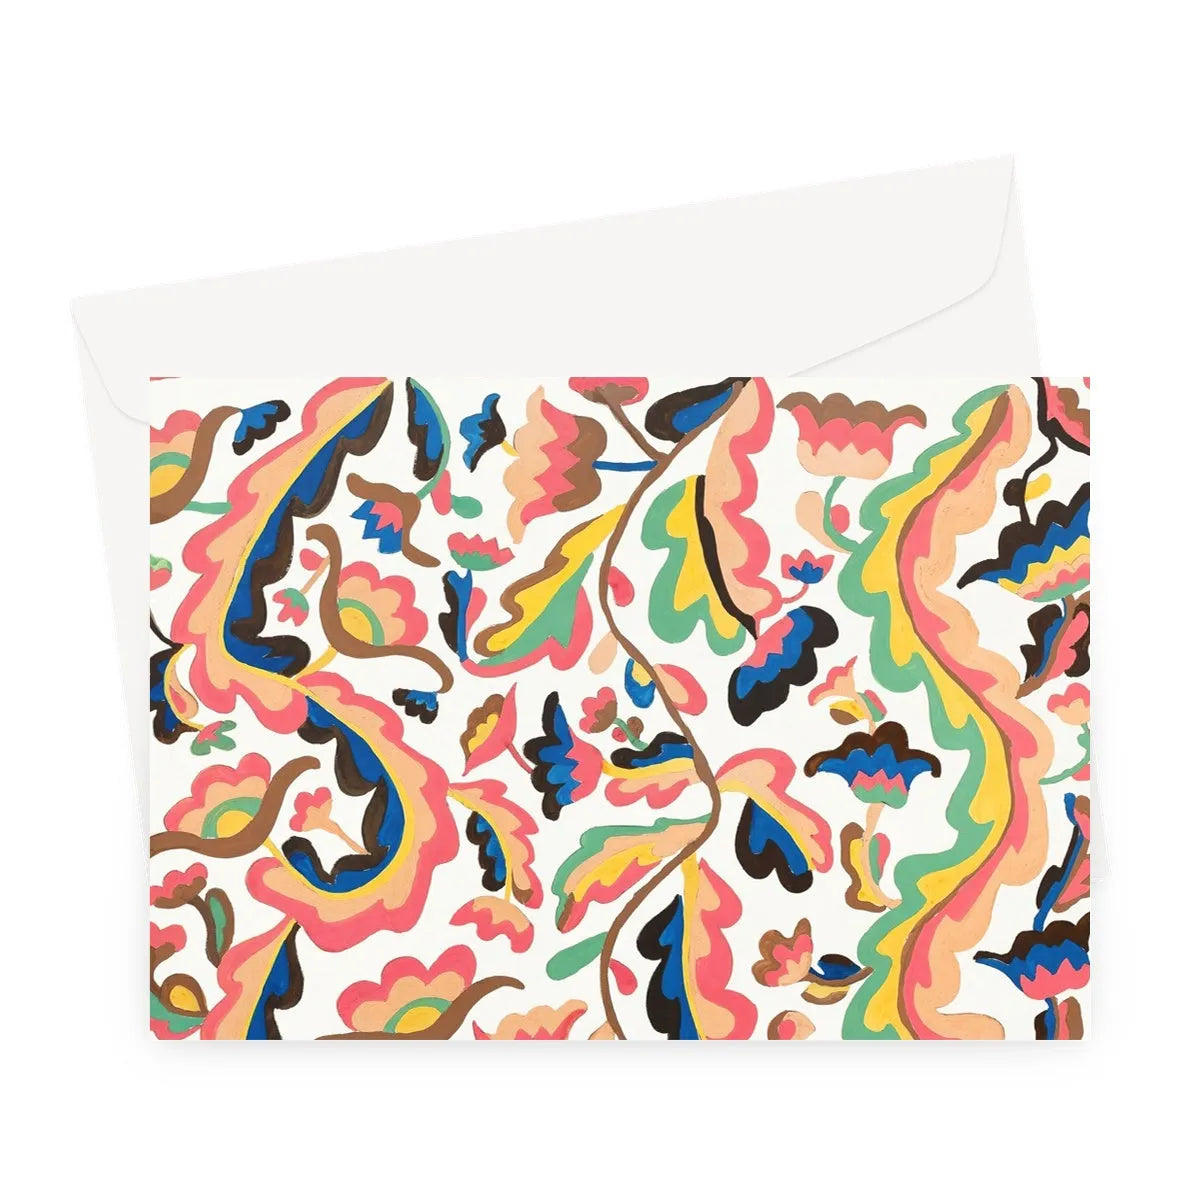 Colcha By Etna Wiswall Greeting Card - A5 Landscape / 1 Card - Notebooks & Notepads - Aesthetic Art